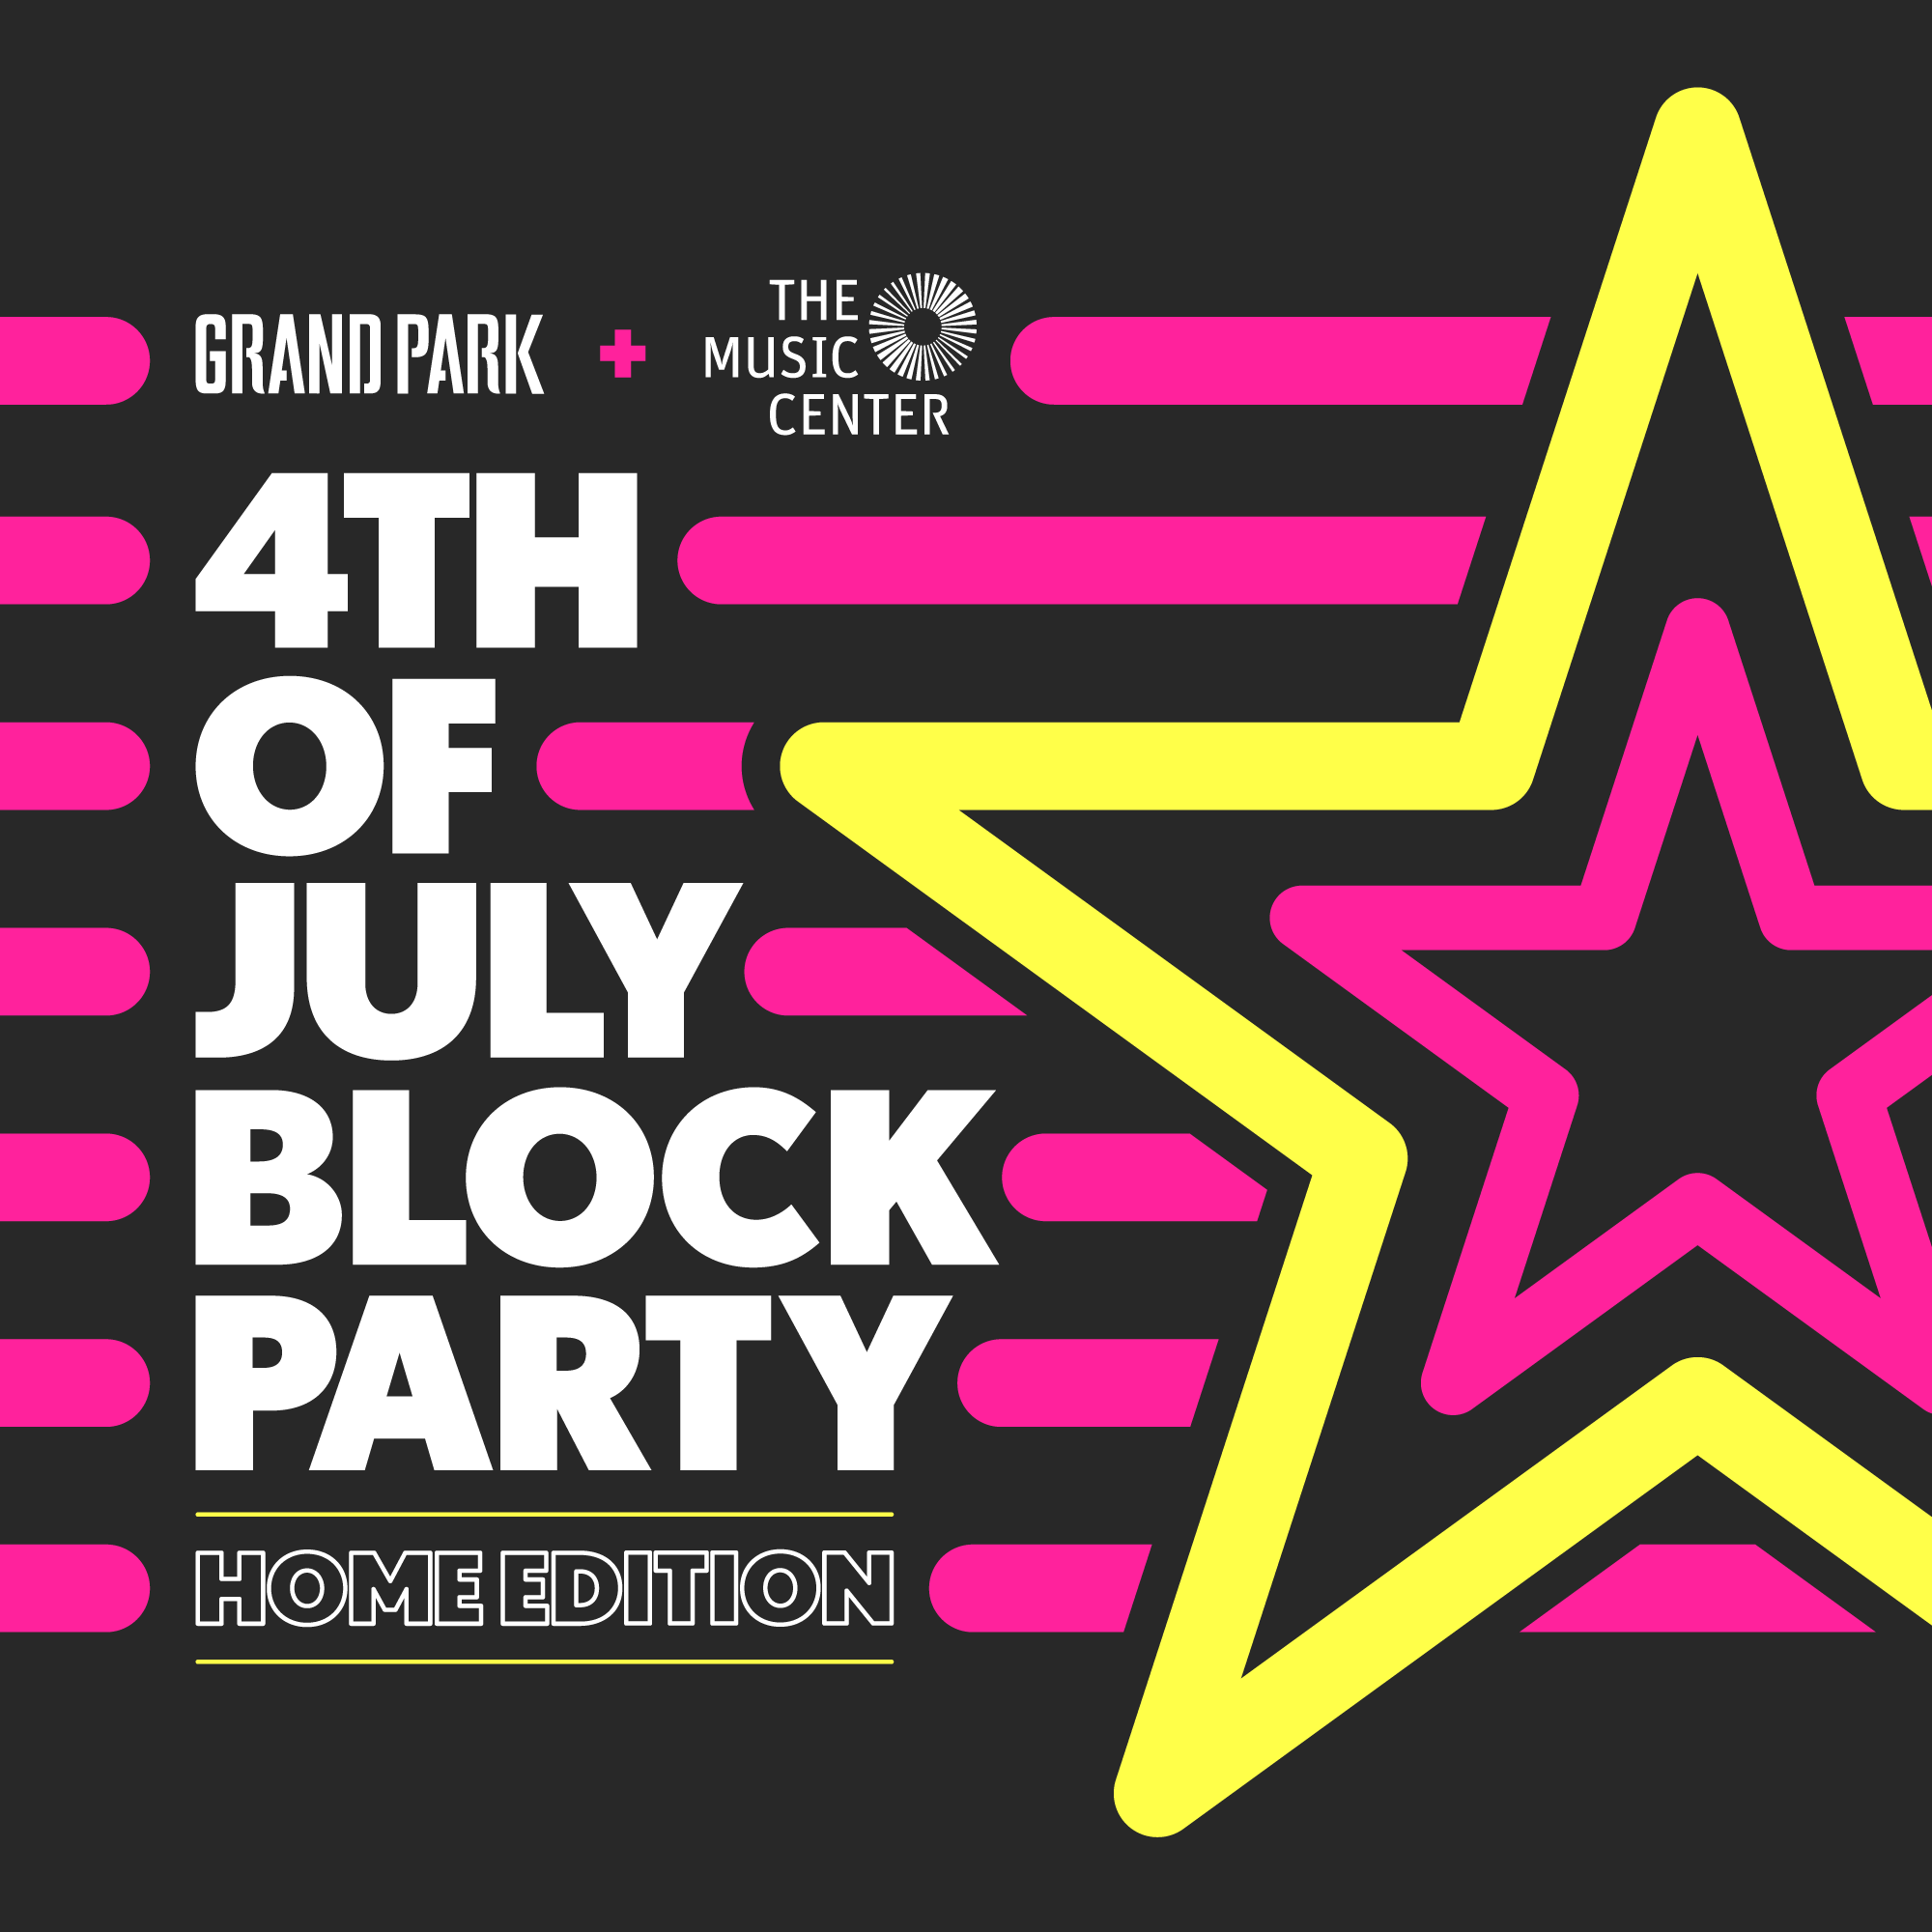 4th of July Block Party, 2020. Home Edition. Grand Park + The Music Center